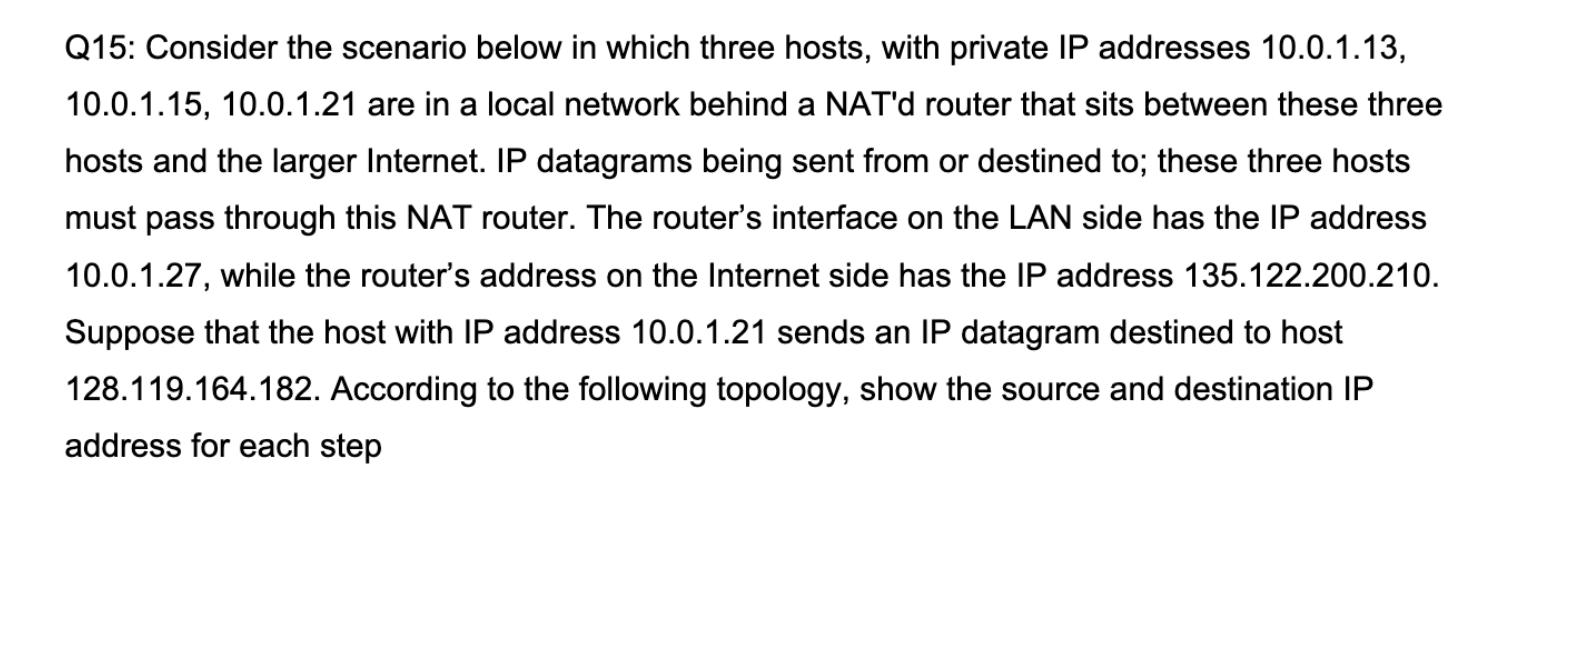 Q15: Consider the scenario below in which three hosts, with private IP addresses 10.0.1.13, 10.0.1.15,